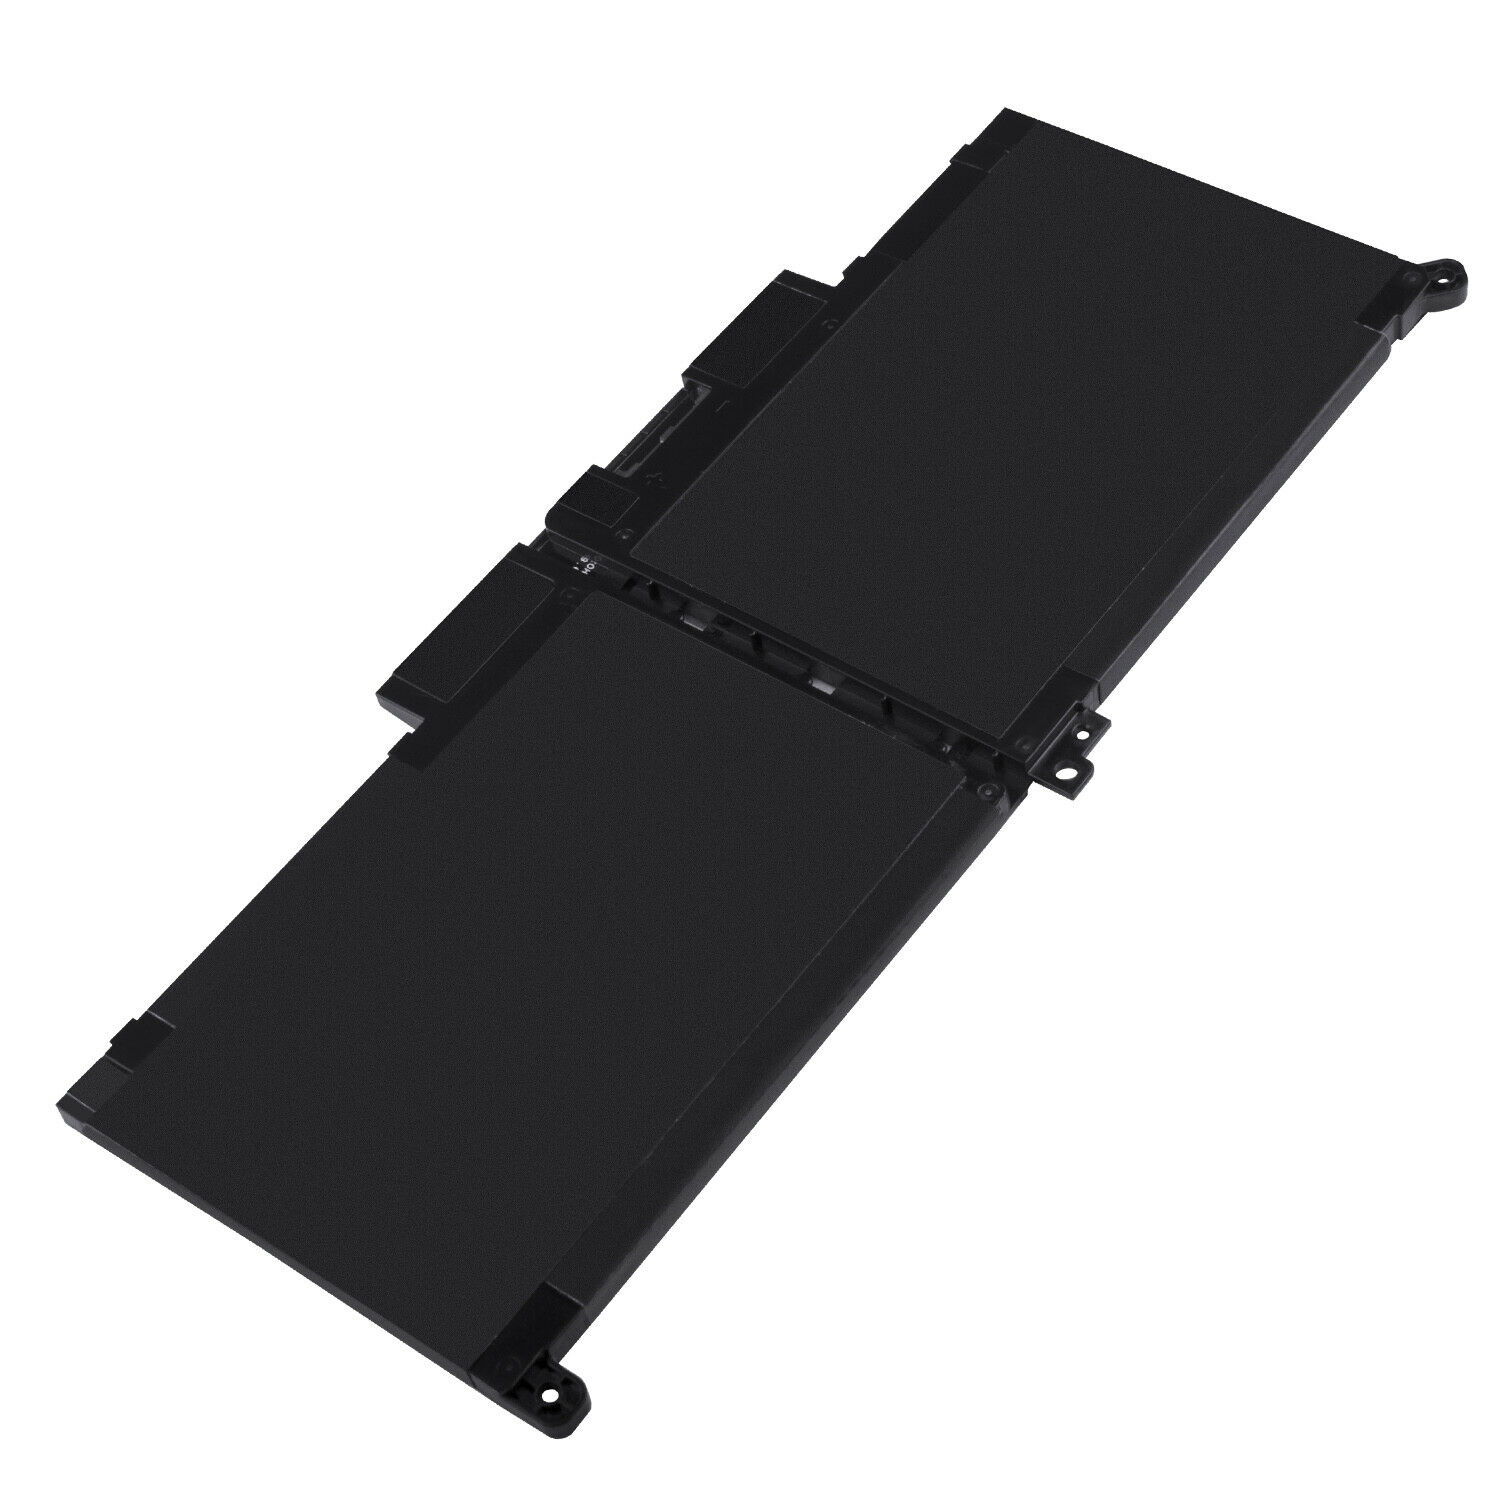 Accu voor F3YGT Dell latitude 7490 (i5-8350U FHD) P73G002 P29S002 KG7VF 2X39G(compatible)